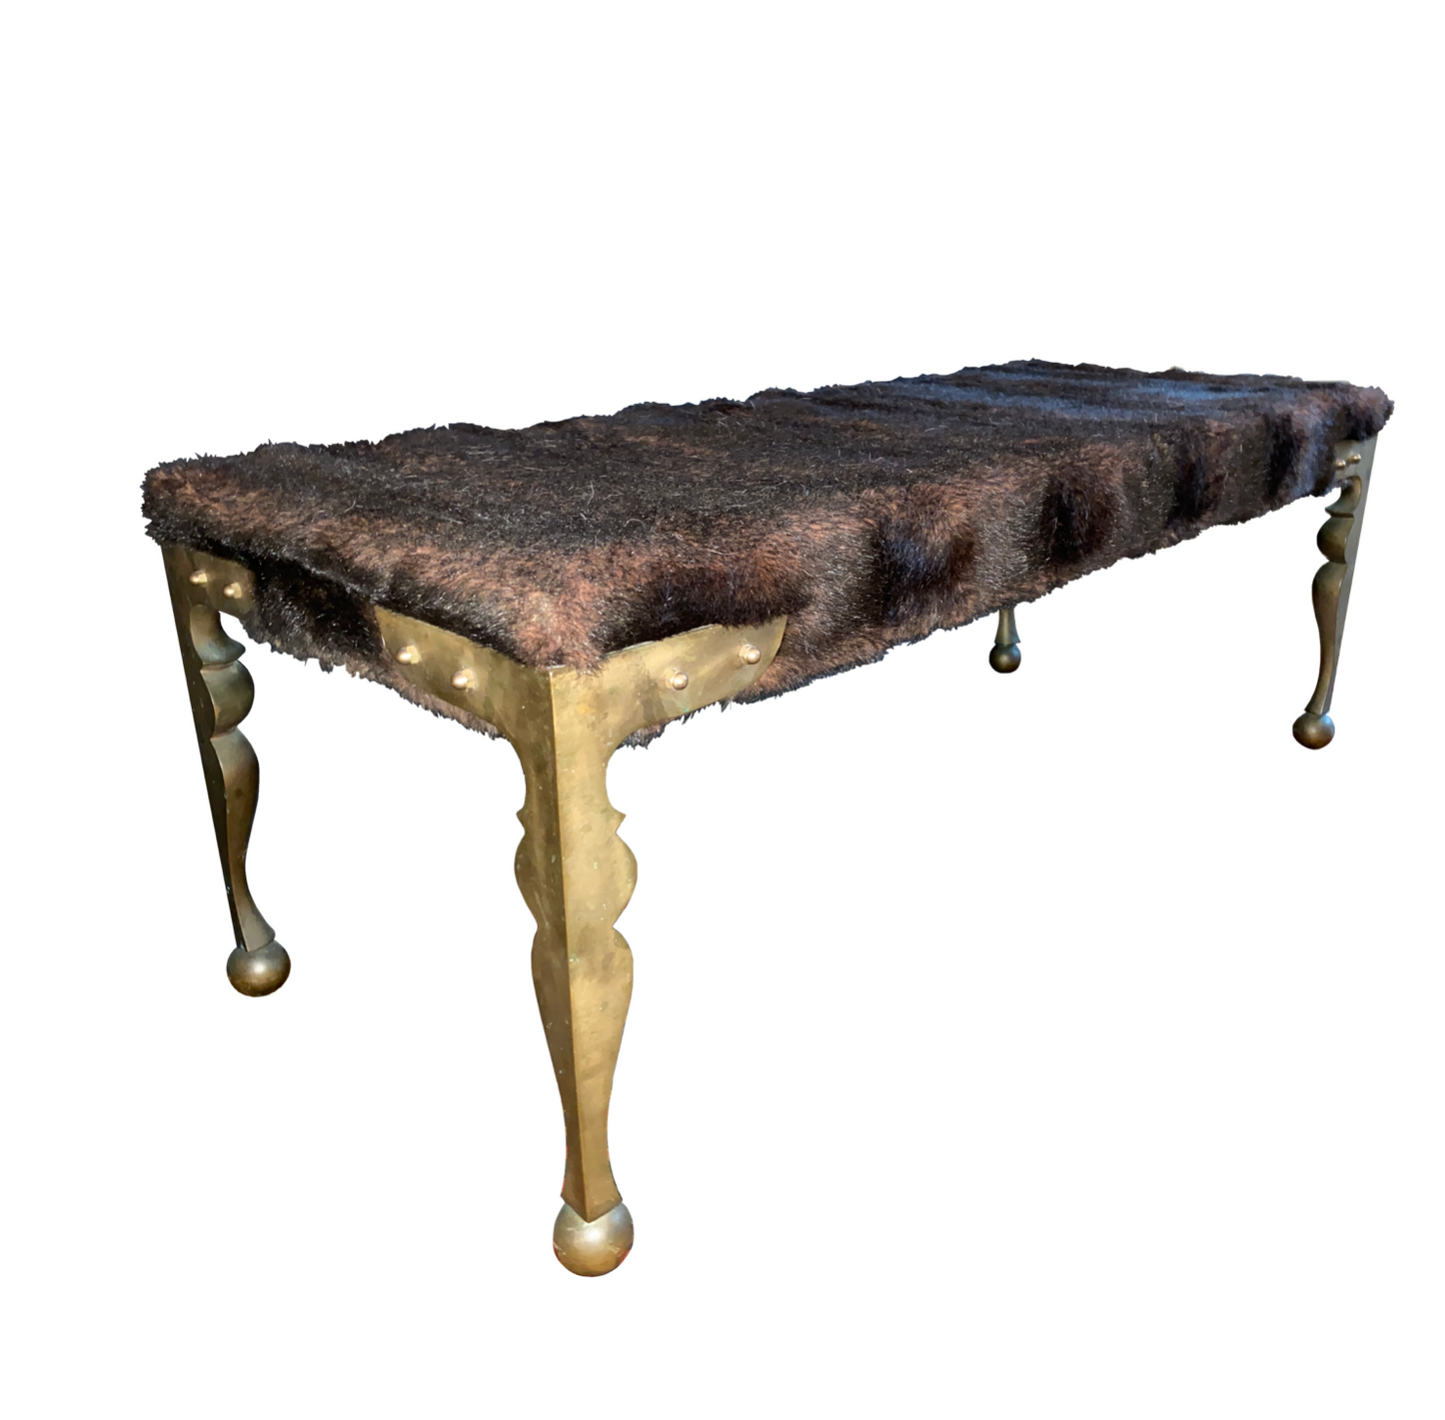 PUCCI De ROSSI, unique piece, bench in solid bronze and synthetic mink.